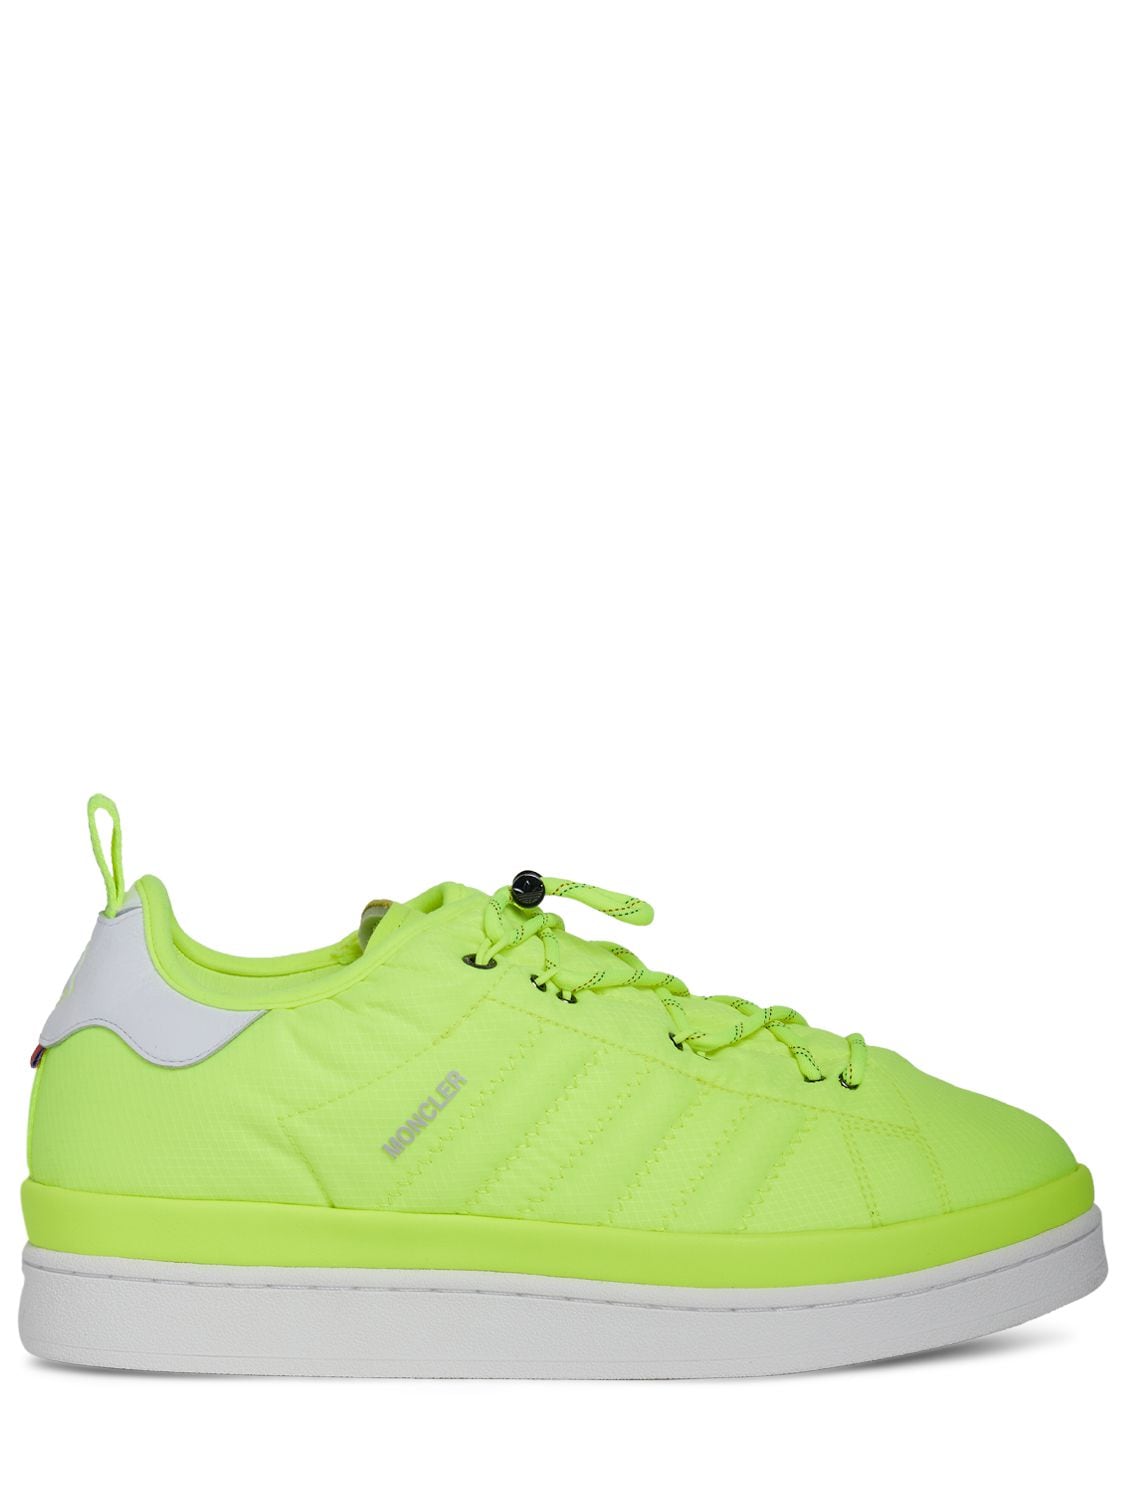 Moncler Genius Moncler X Adidas Campus Leather Trainers In Bright Yellow